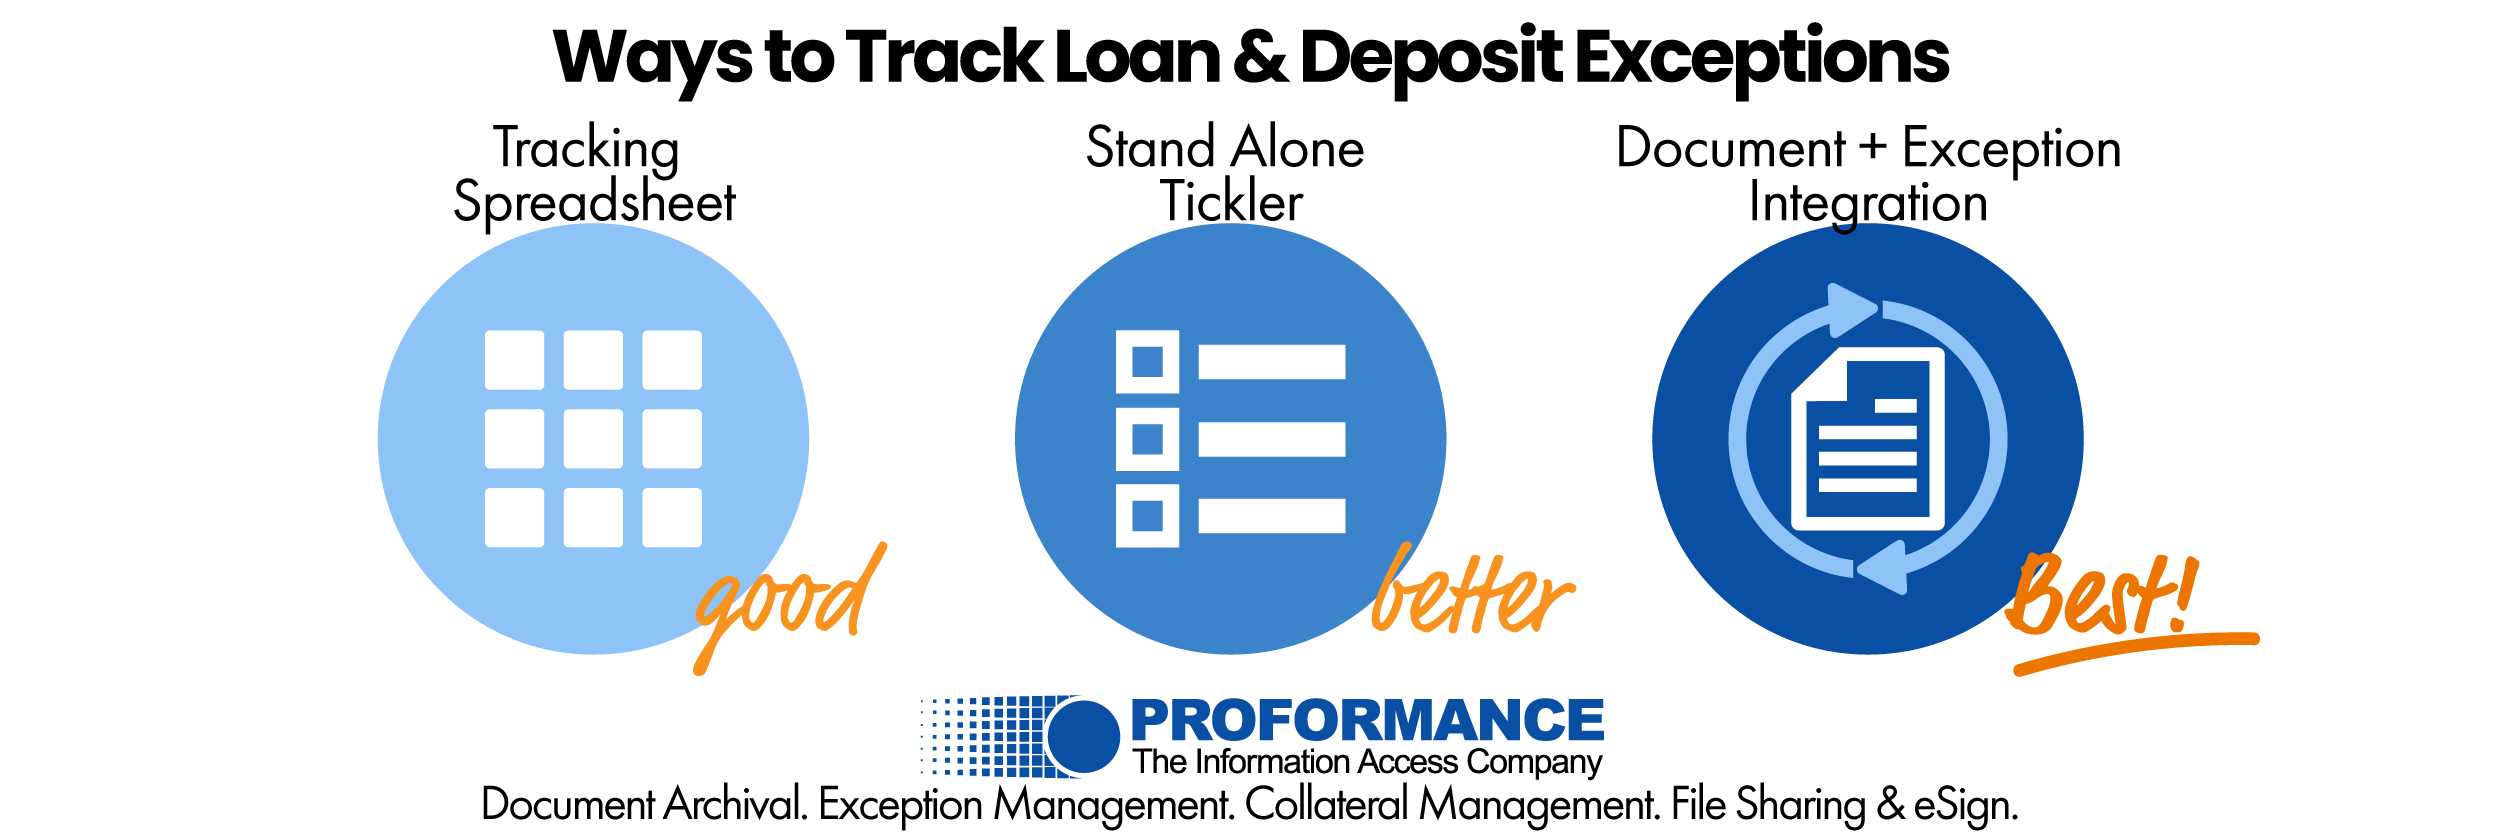 ways to track loan and deposit exceptions 2021.1